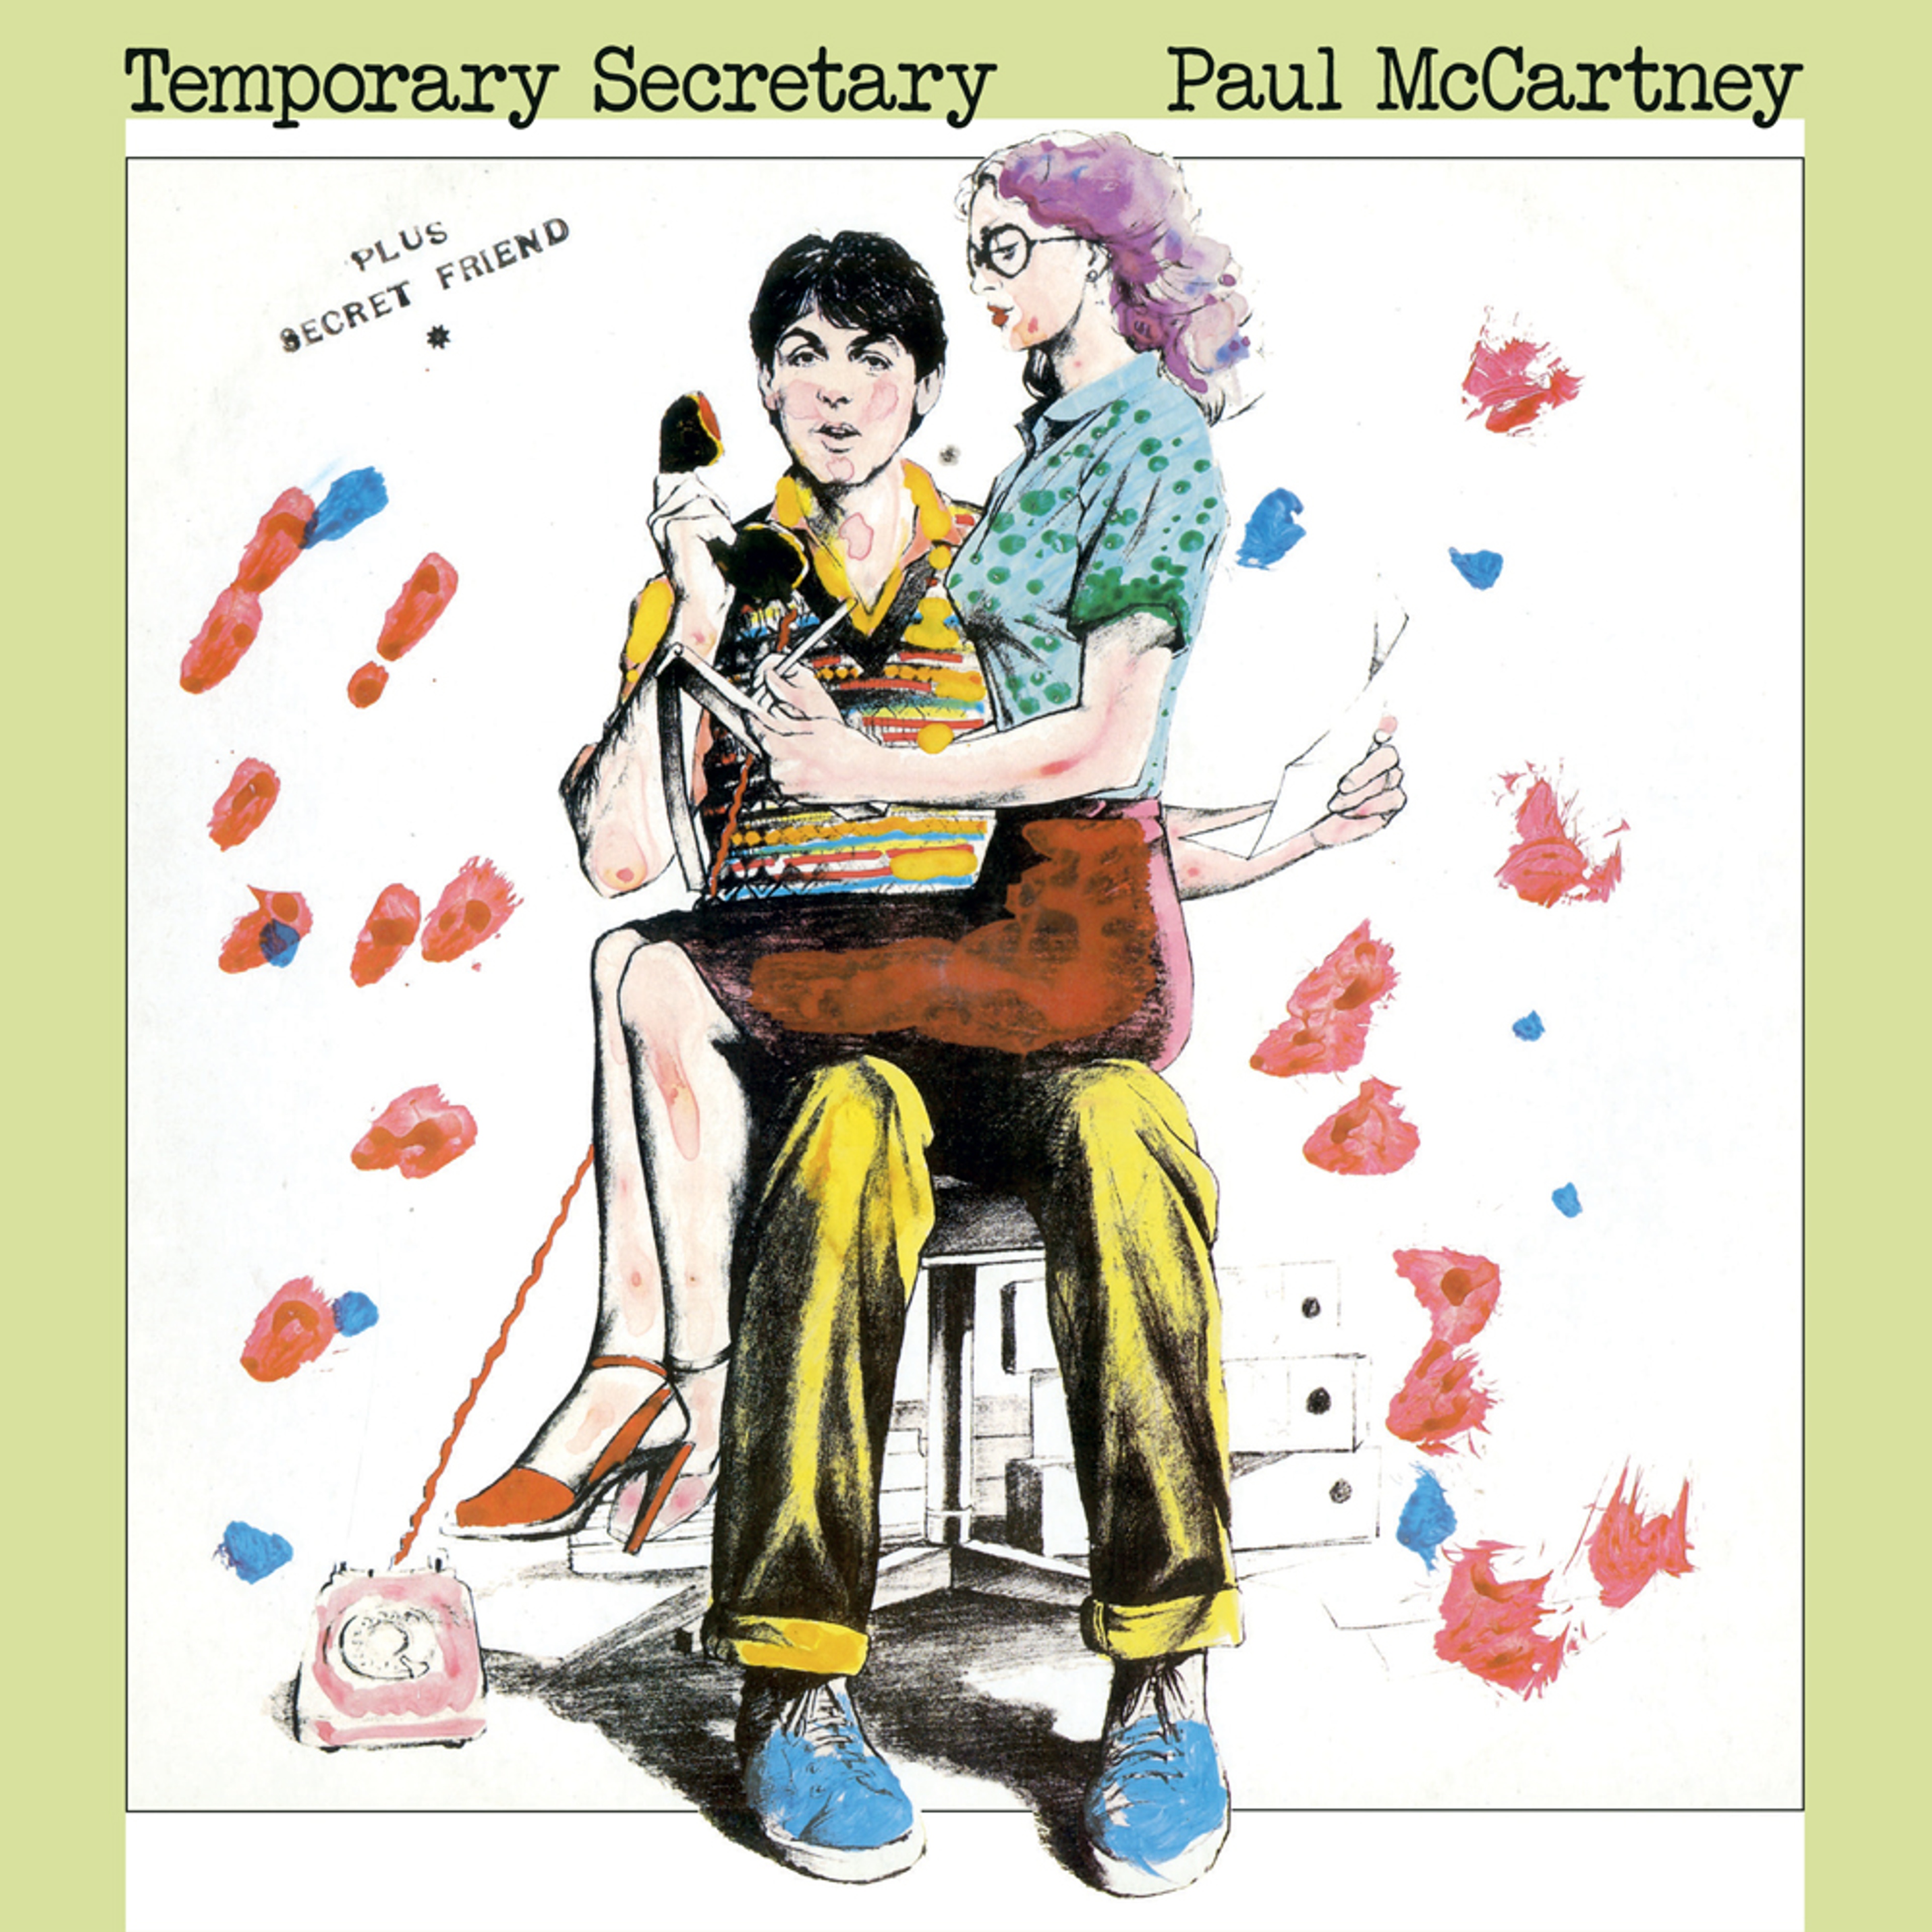 “Temporary Secretary” Single artwork as featured in 'The 7" Singles Box'